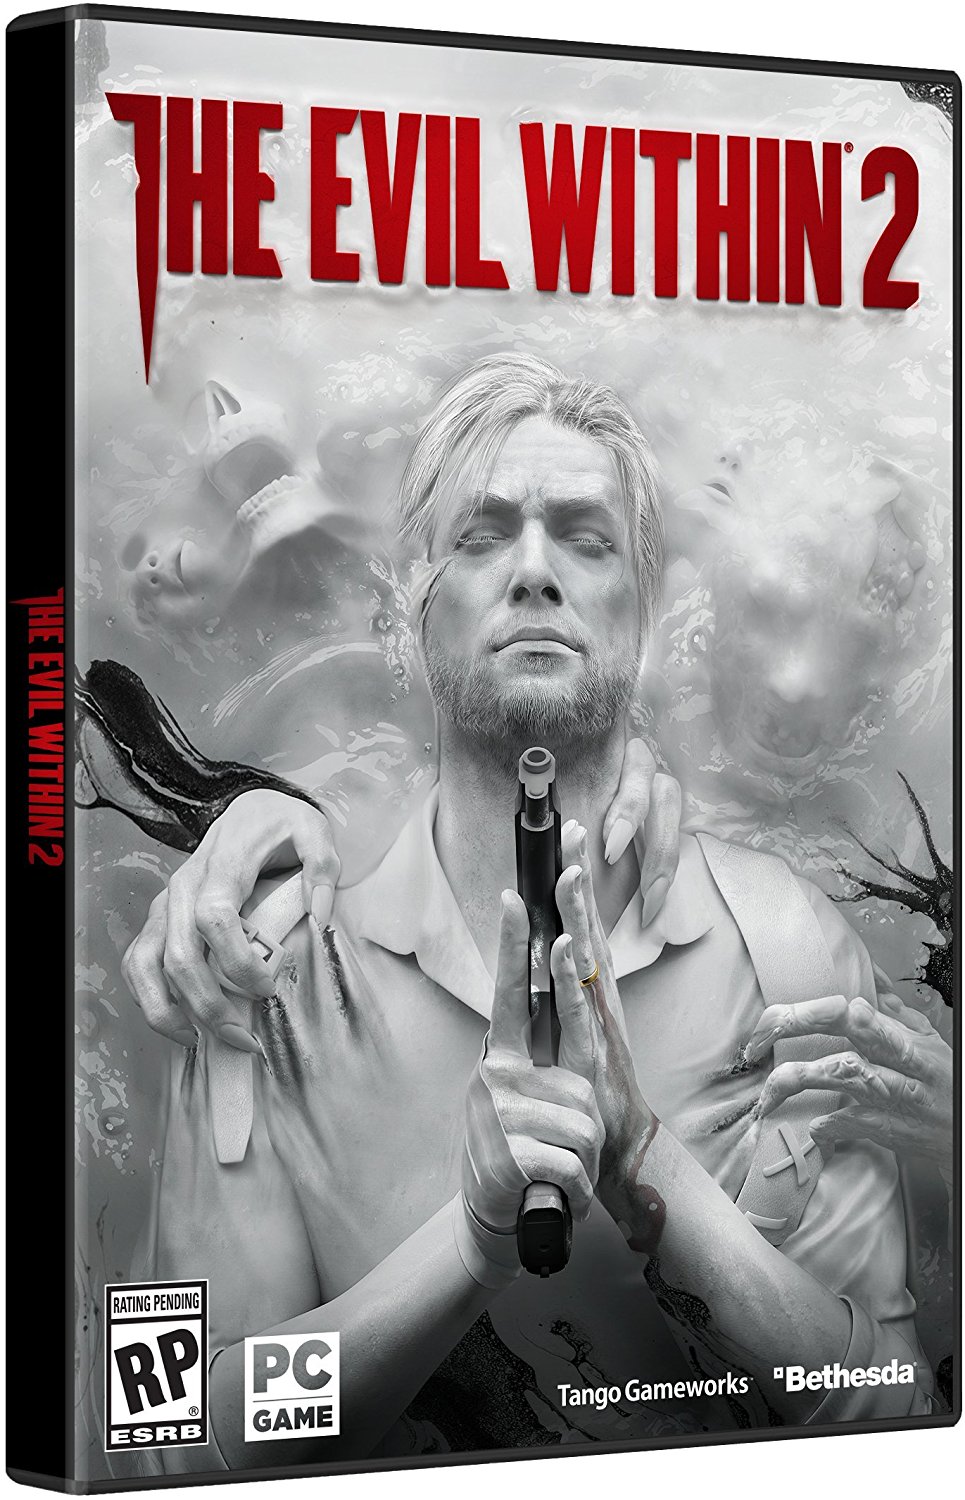 Bote de The Evil Within 2